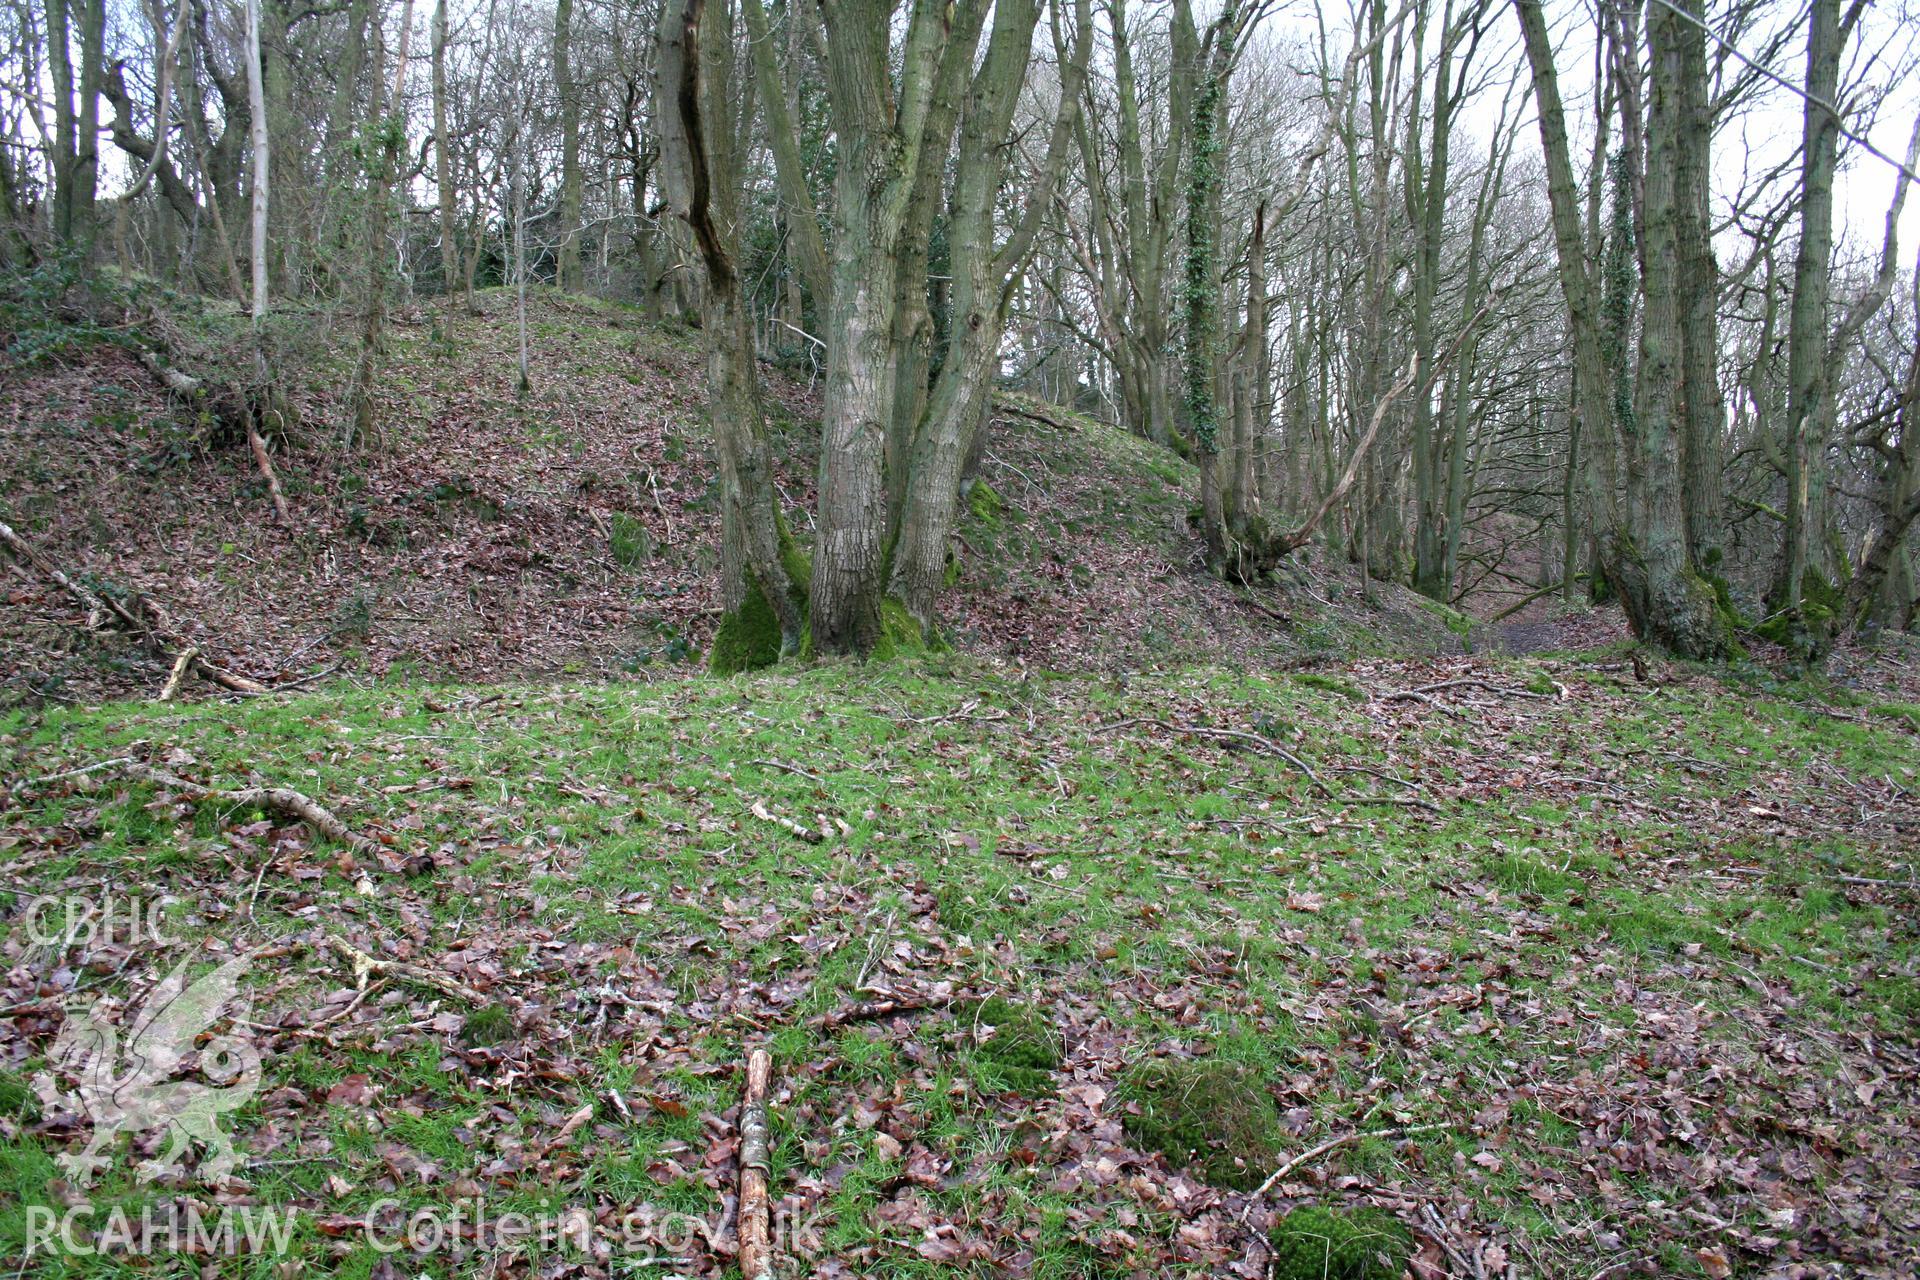 Gaer Fawr Hillfort.  Approach corridor  to the west gateway, from the west.